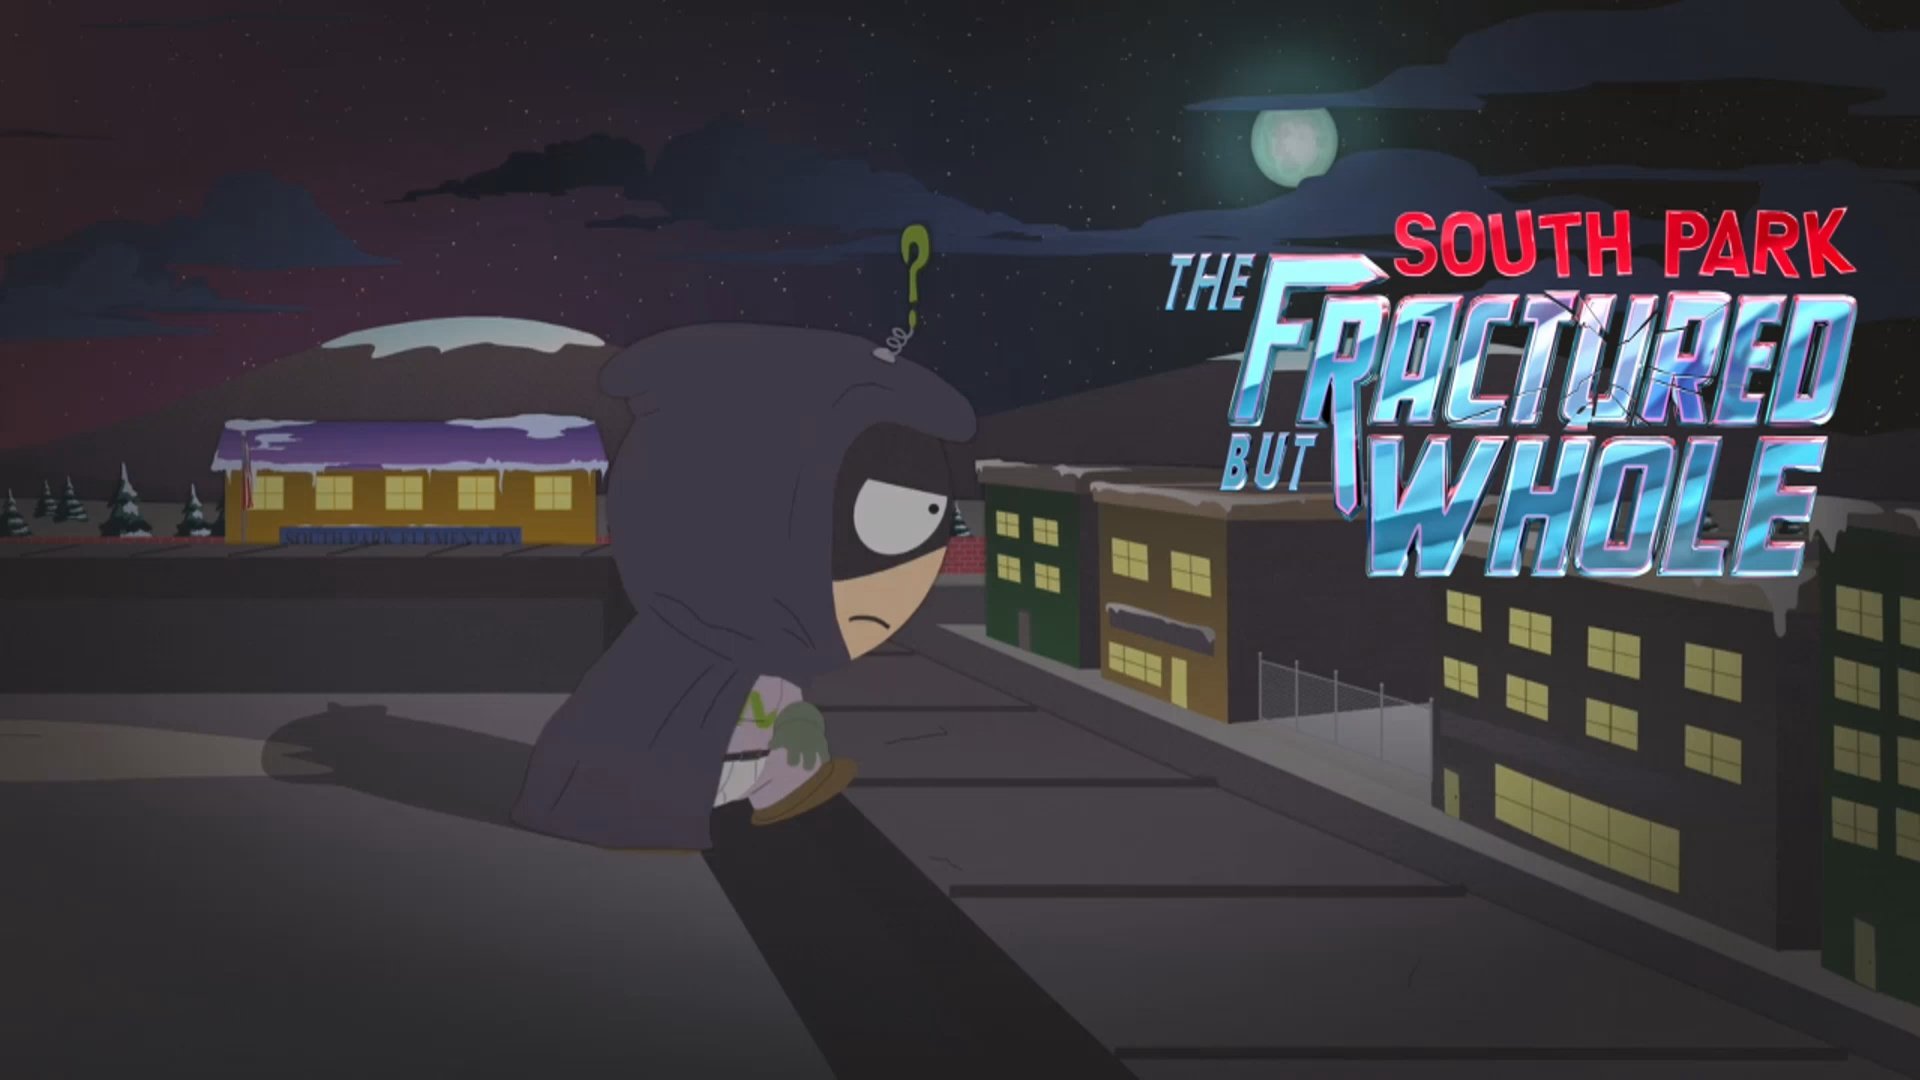 Looking Forward To  Mysterion  South Park The Fractured But Whole Medium   1366x768 PNG Download  PNGkit